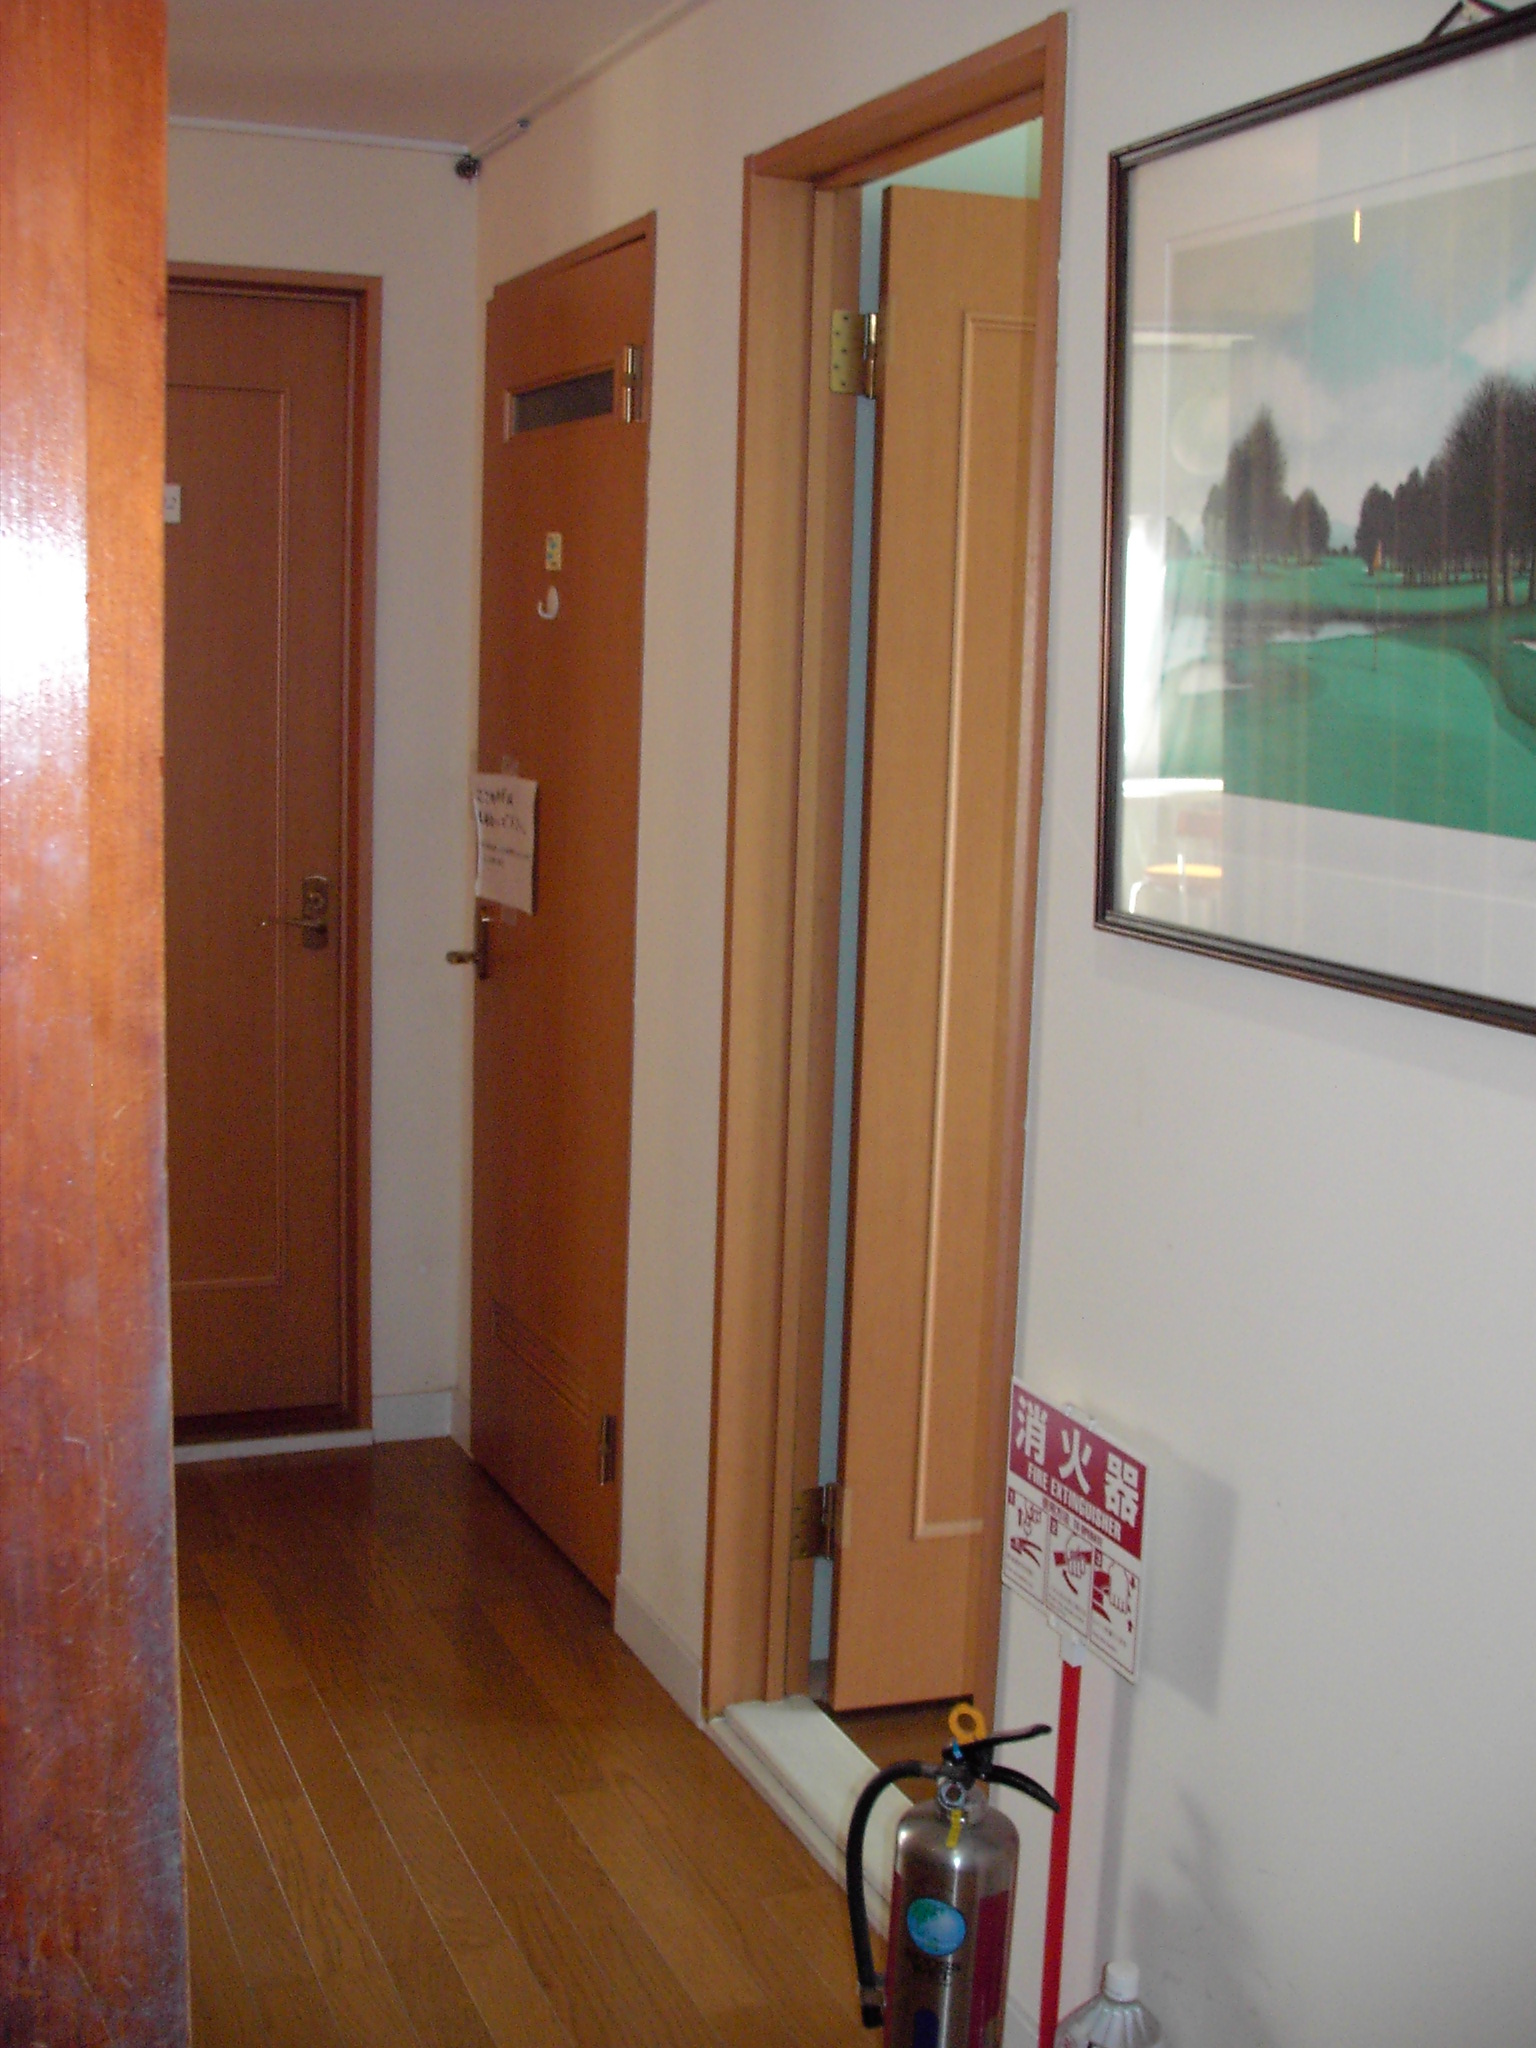 Other common areas. 401, Room entrance from the fourth floor hallway